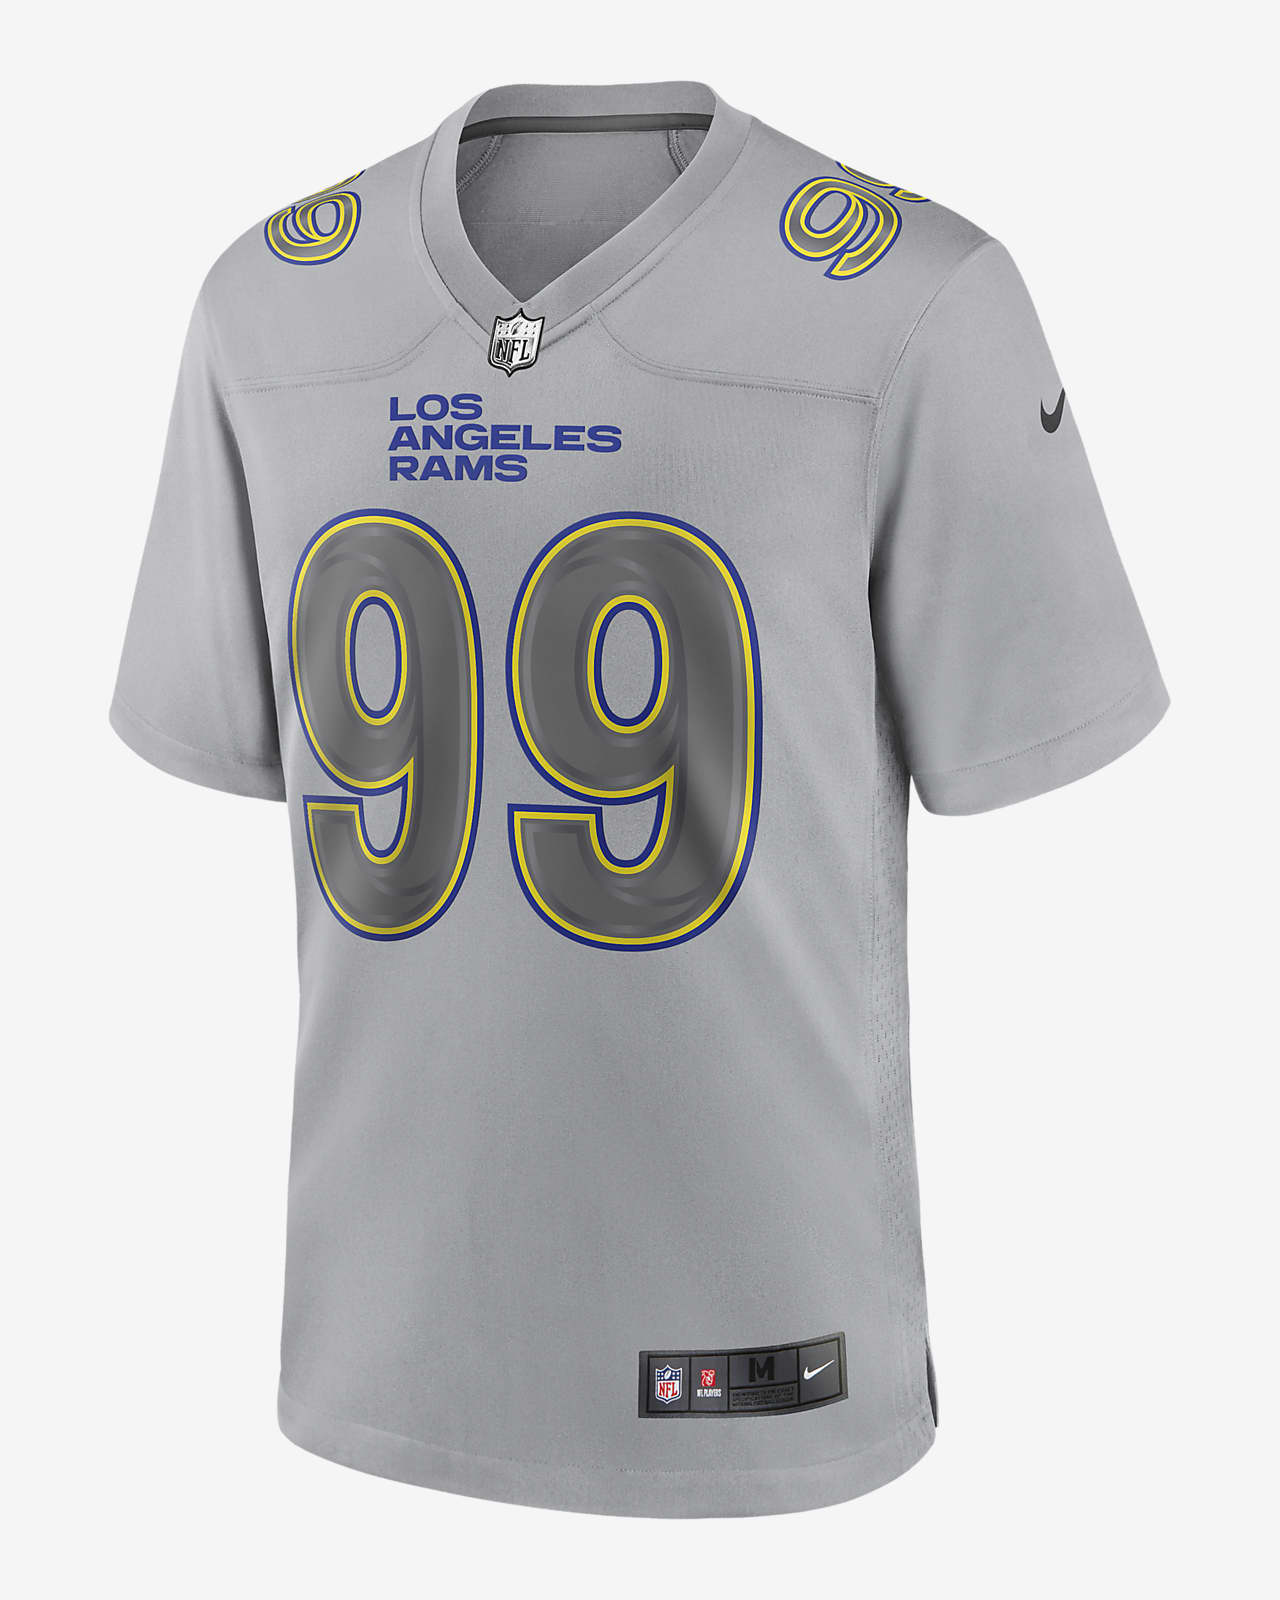 NFL Los Angeles Rams Atmosphere (Aaron Donald) Men's Fashion Football Jersey.